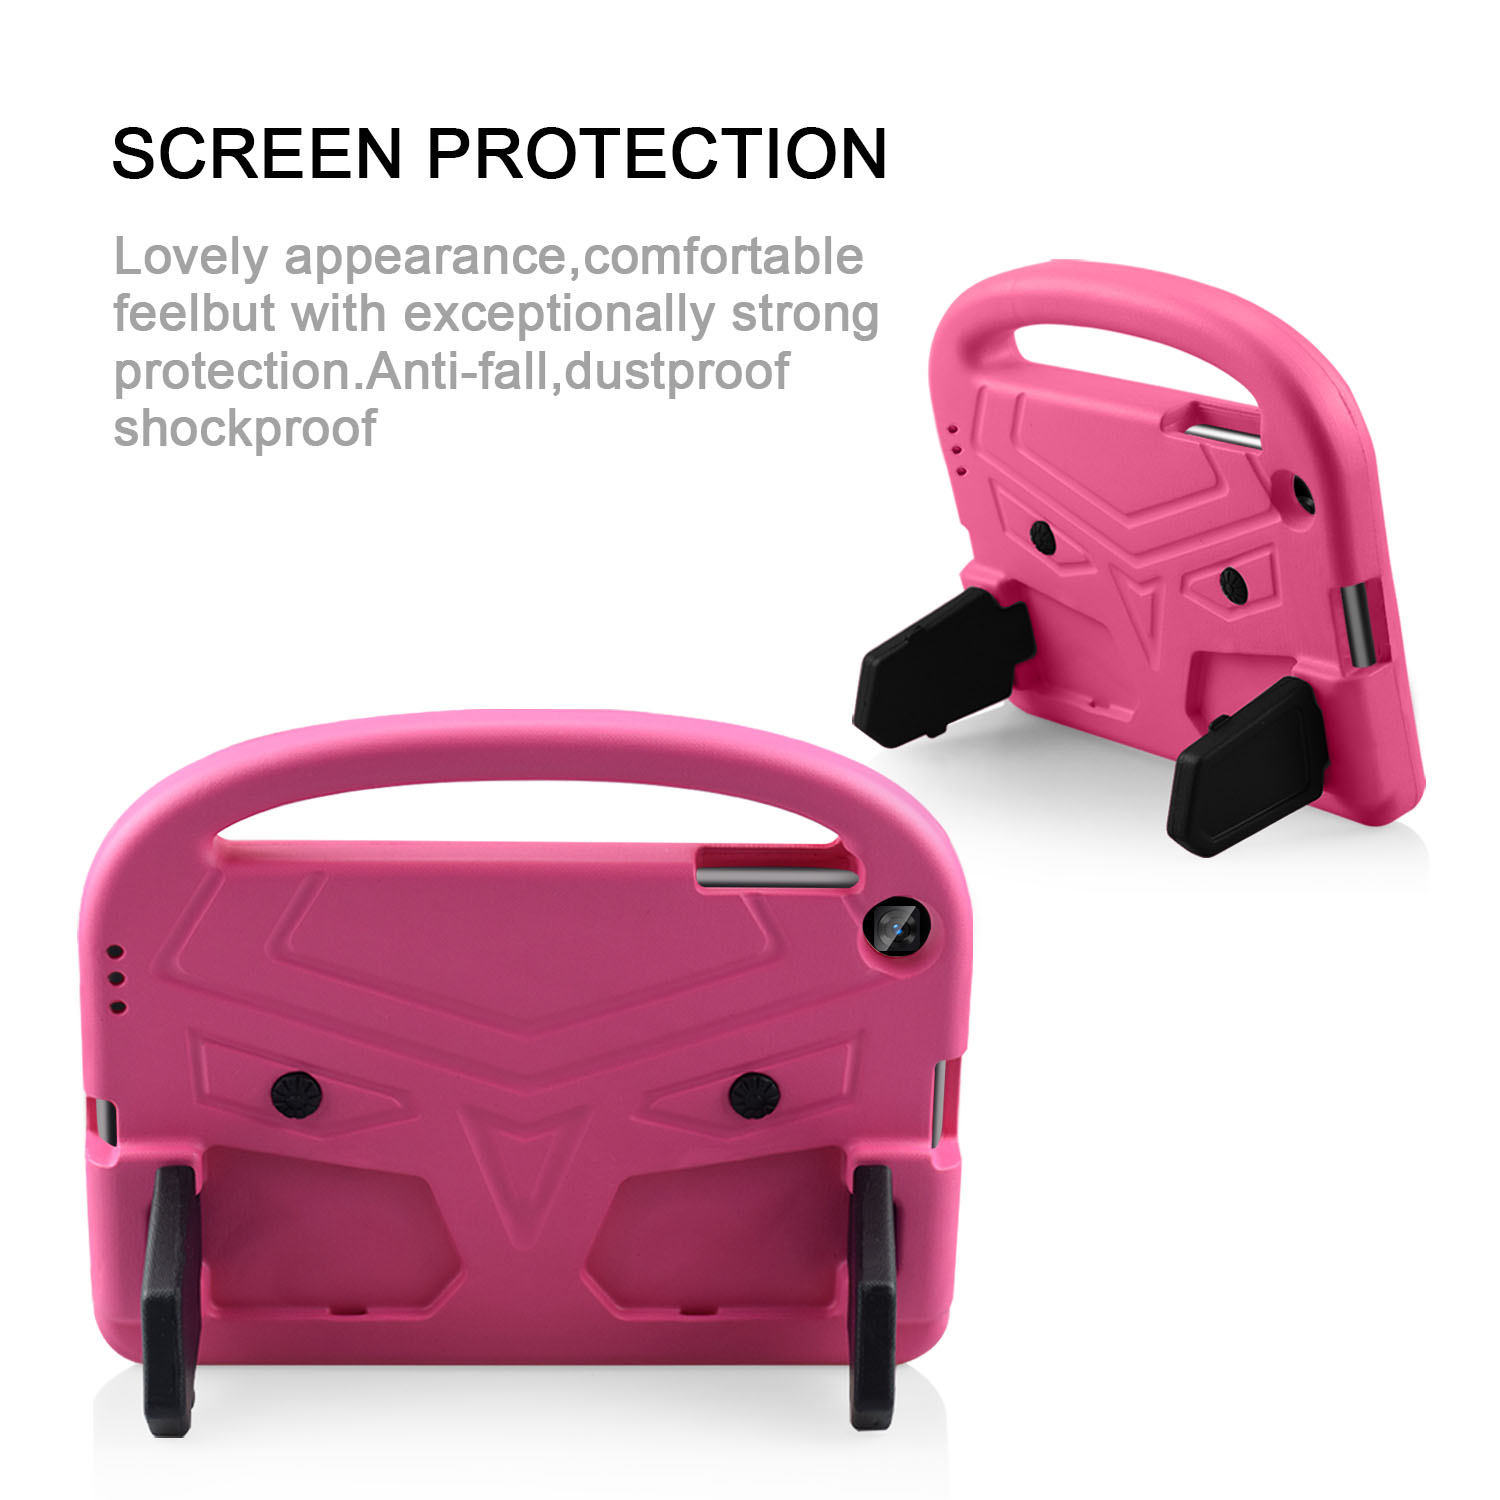 Sparrow Pattern with kickstand, Samsung Tab A 10.1 T510/515, rose